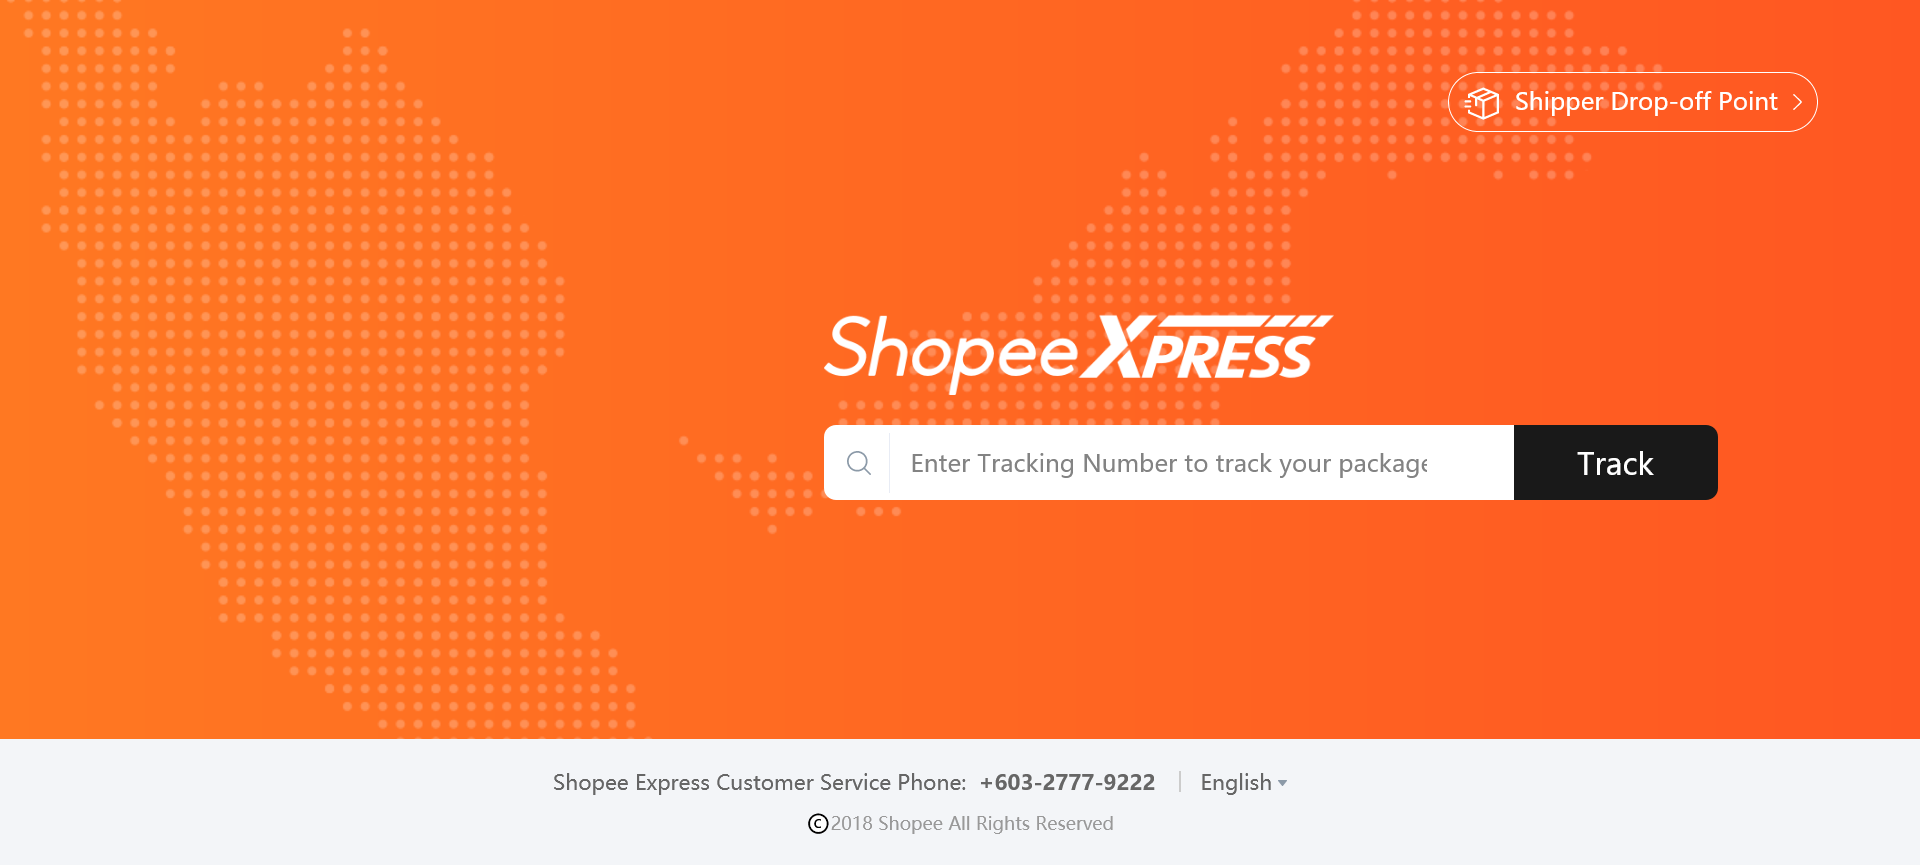 Shopee xpress drop off point